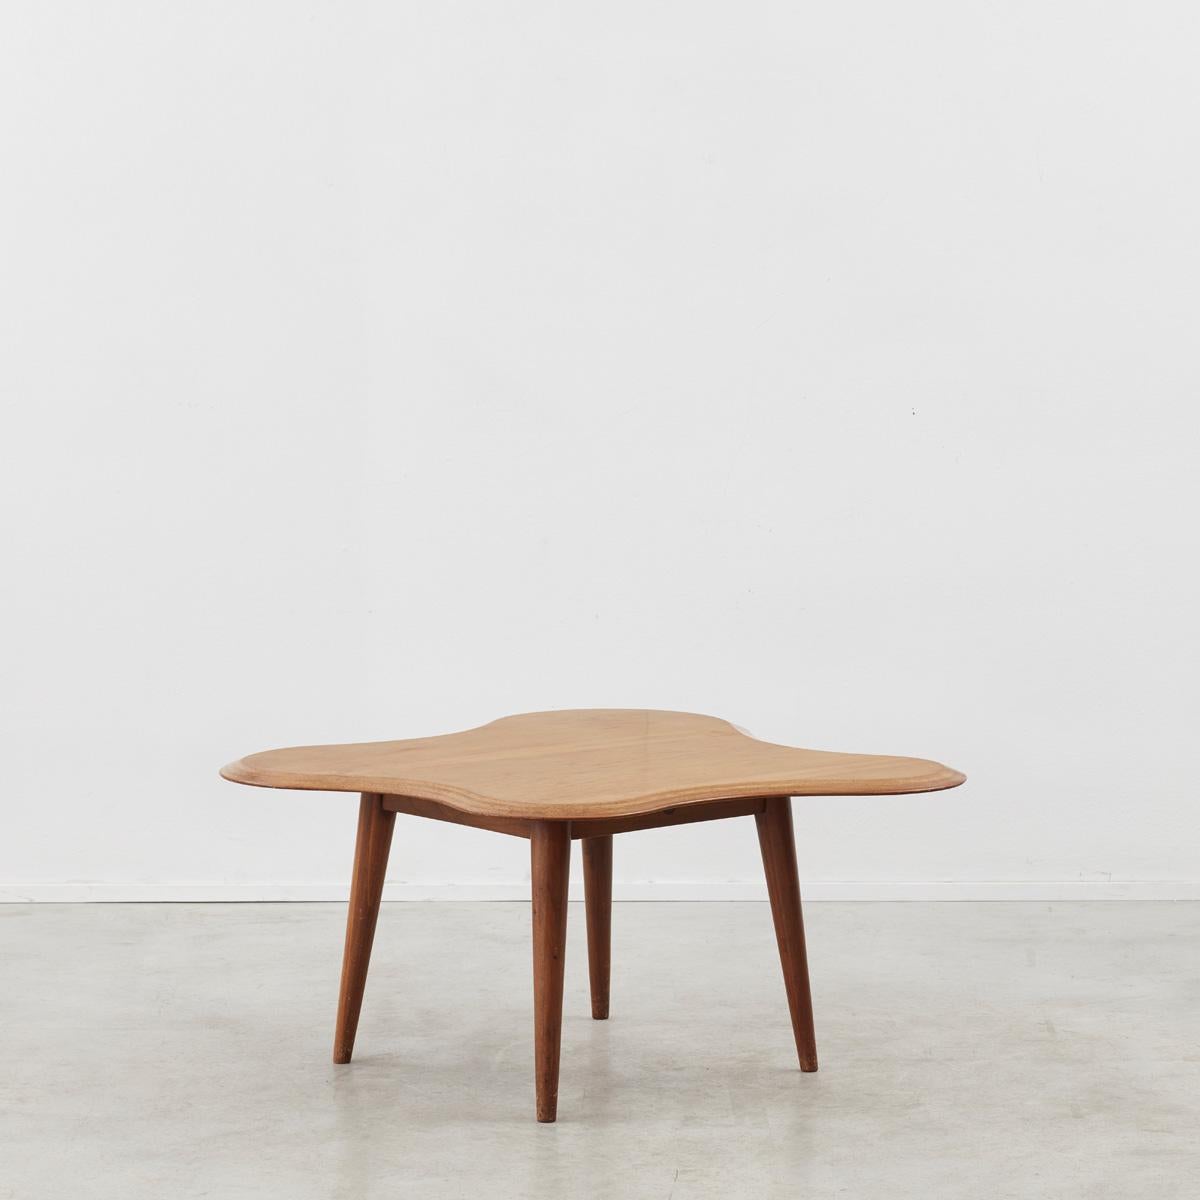 Named the ‘Amoeboid’ by the designer, the table has become known as the ‘Cloud table’ also after its form. Designed by Neil Morris for Morris & Co, Glasgow in 1947, it exploits the design possibilities of laminated wood by combining French polished